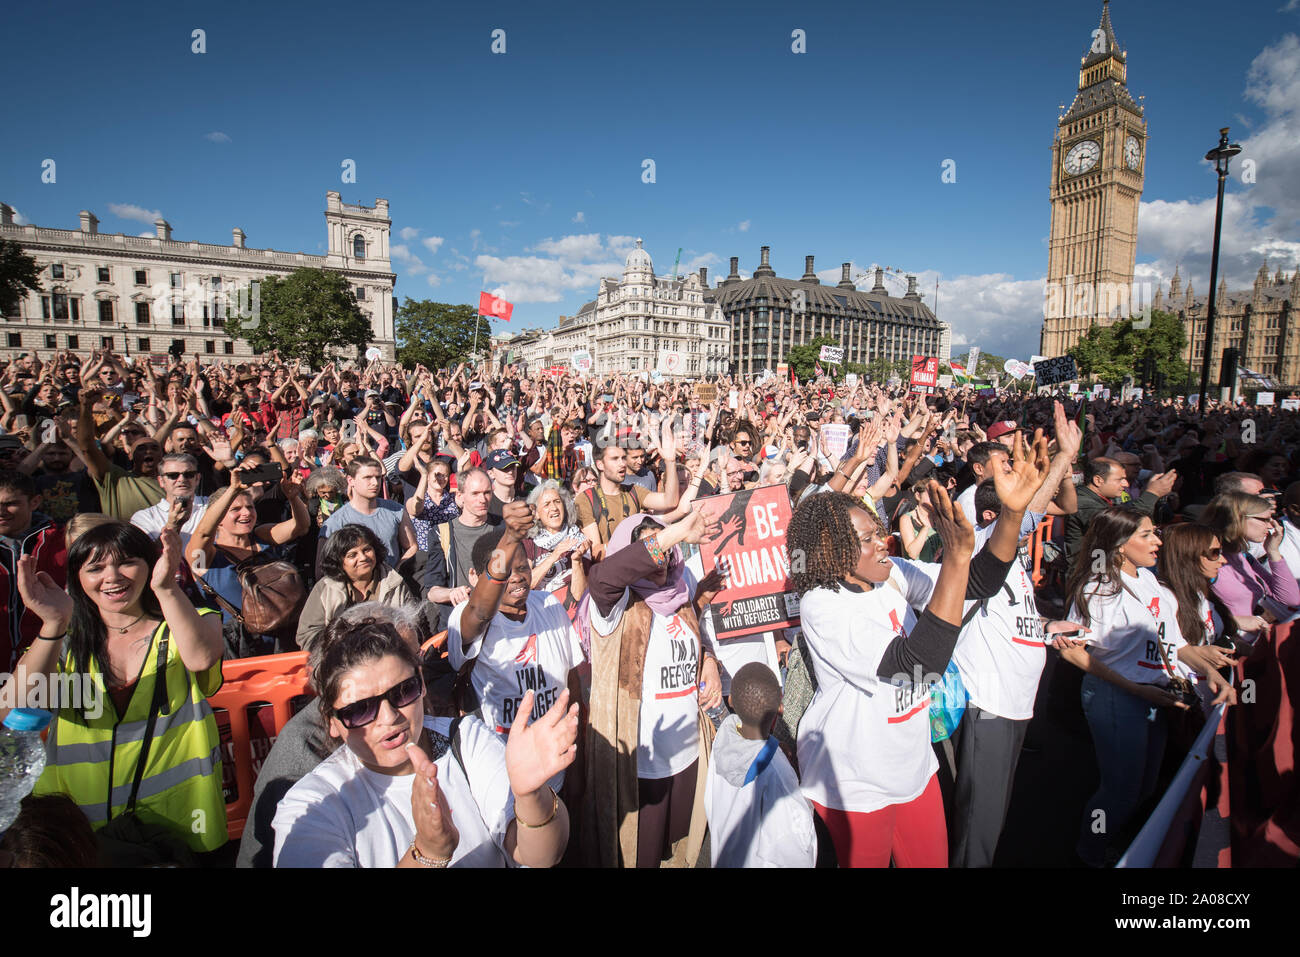 Parliament Square, London, UK. 12th September, 2015. The newly elected leader of the Labour Party, Jeremy Corbyn, gives a speech in front of thousands Stock Photo